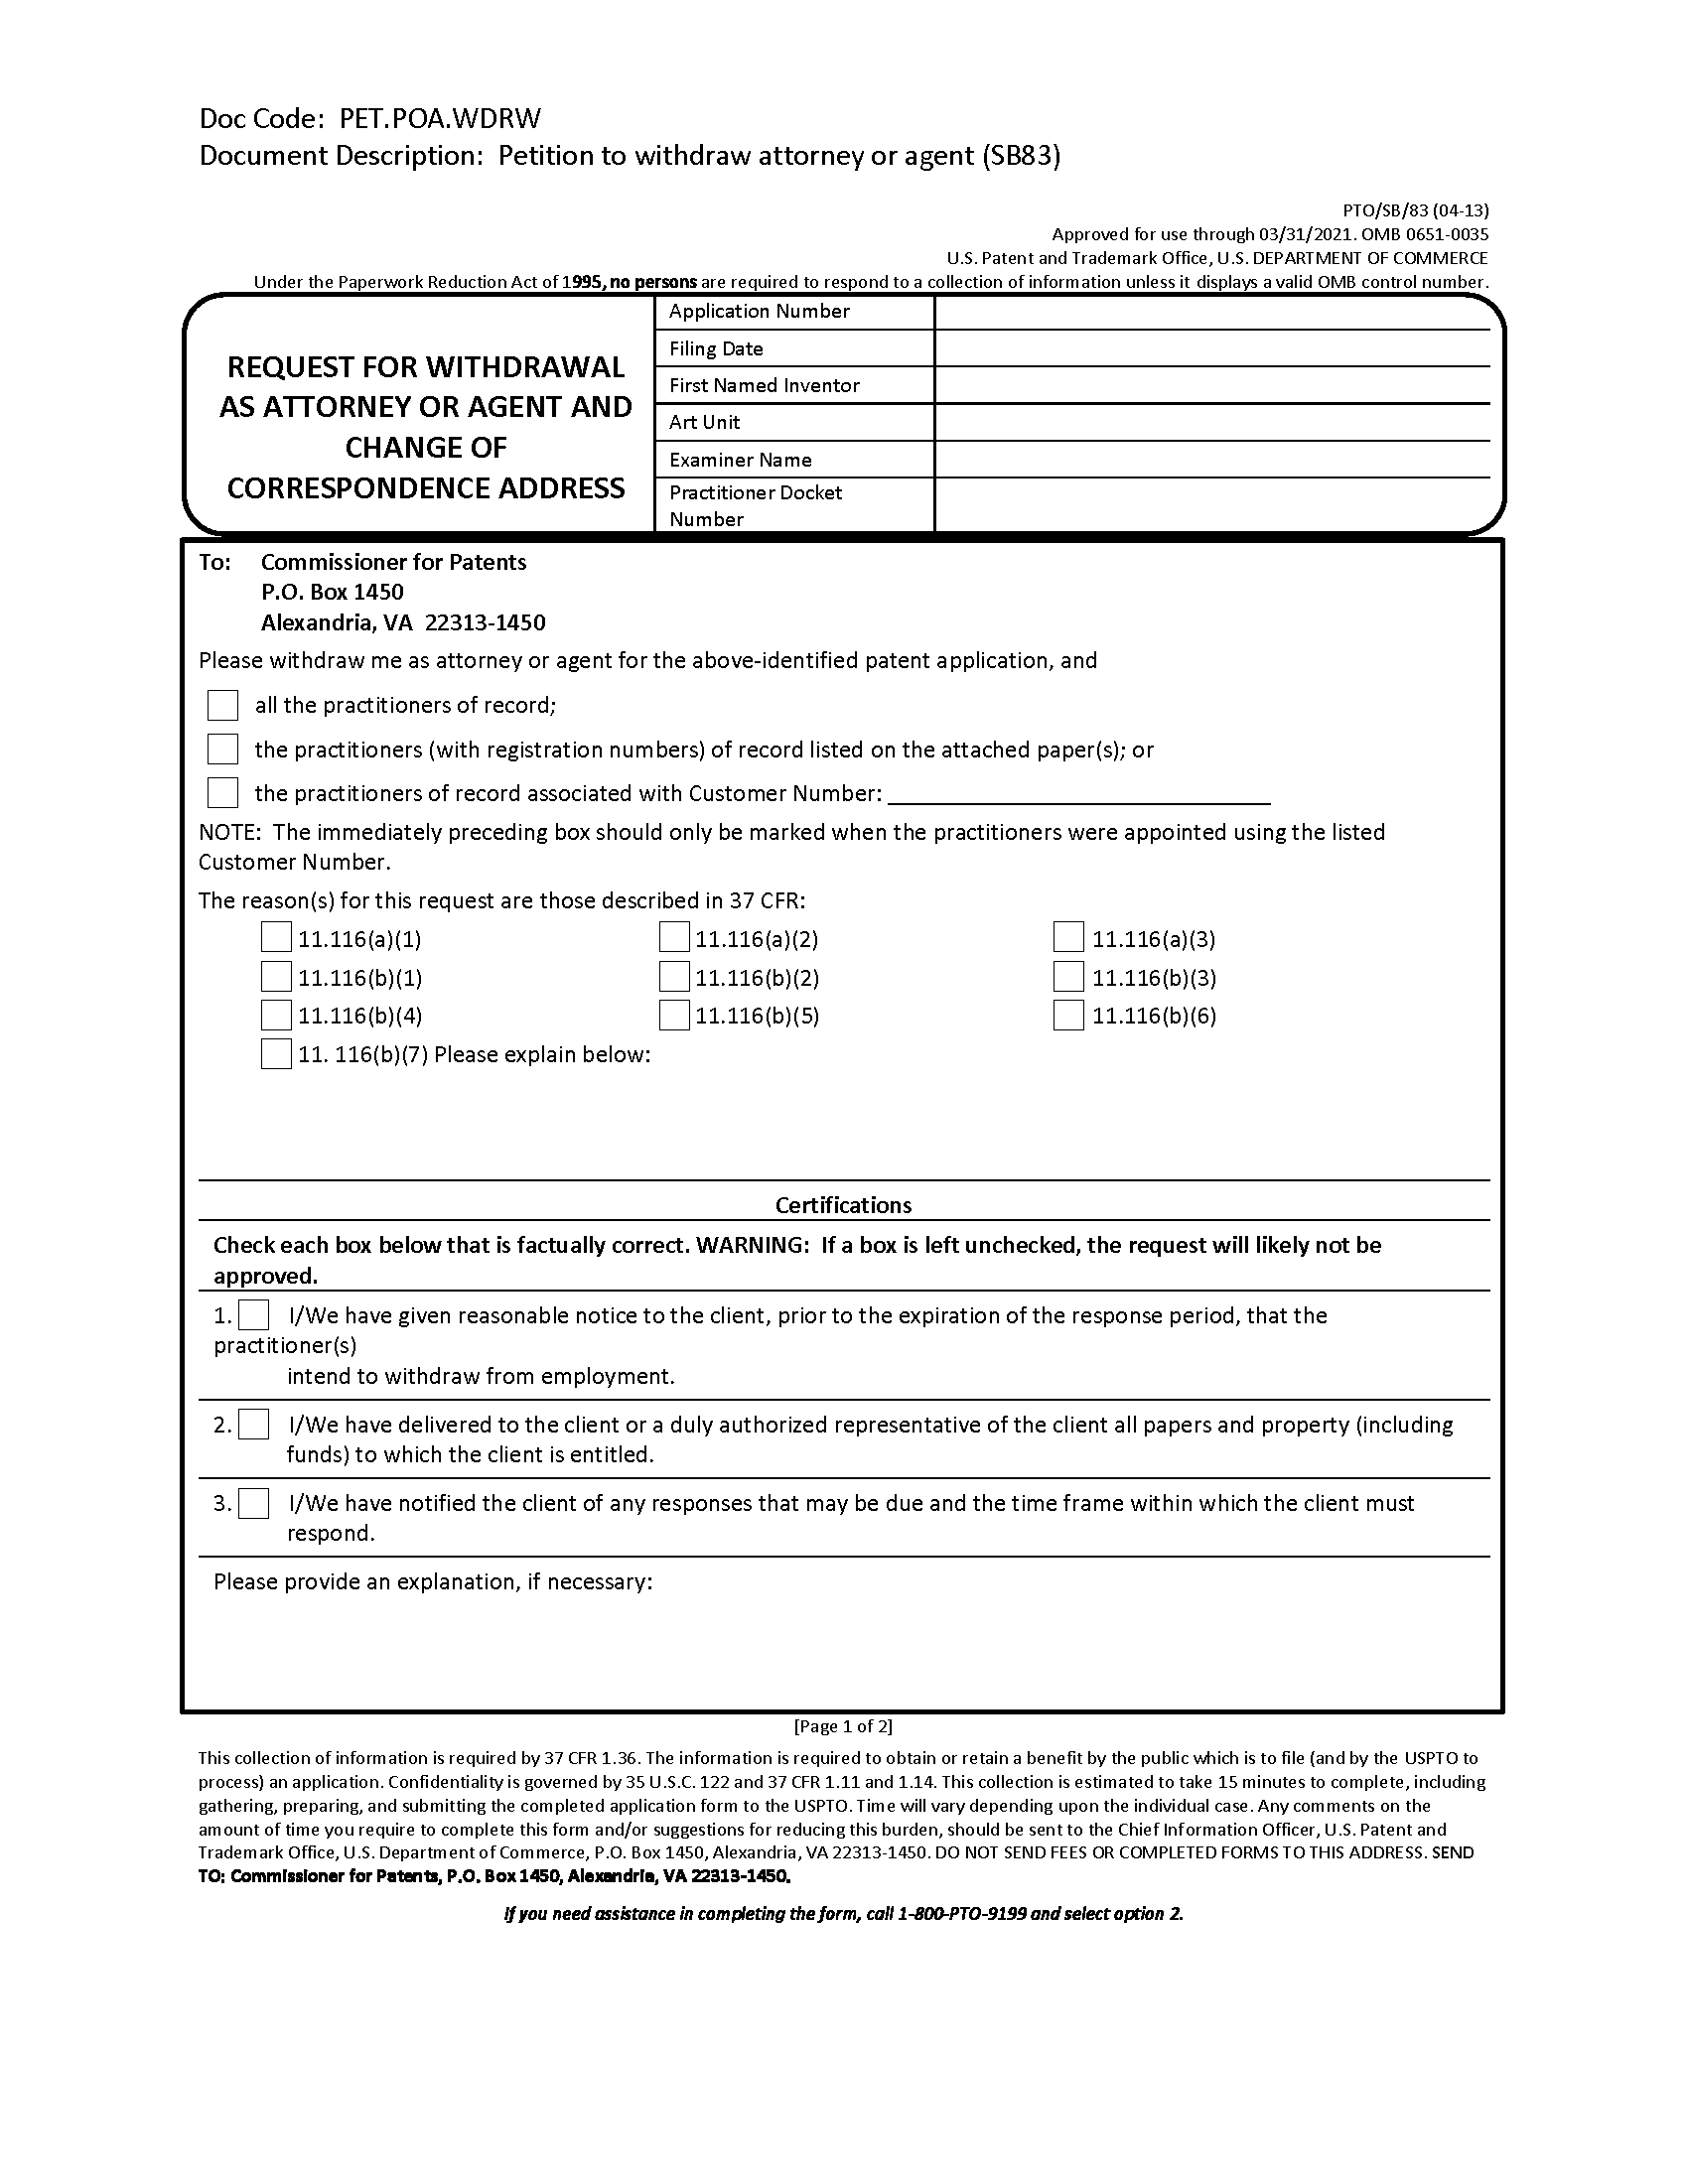 PTO/SB/83. Request for Withdrawal as Attorney or Agent and Change of Correspondence Address (Page 1 of 2)